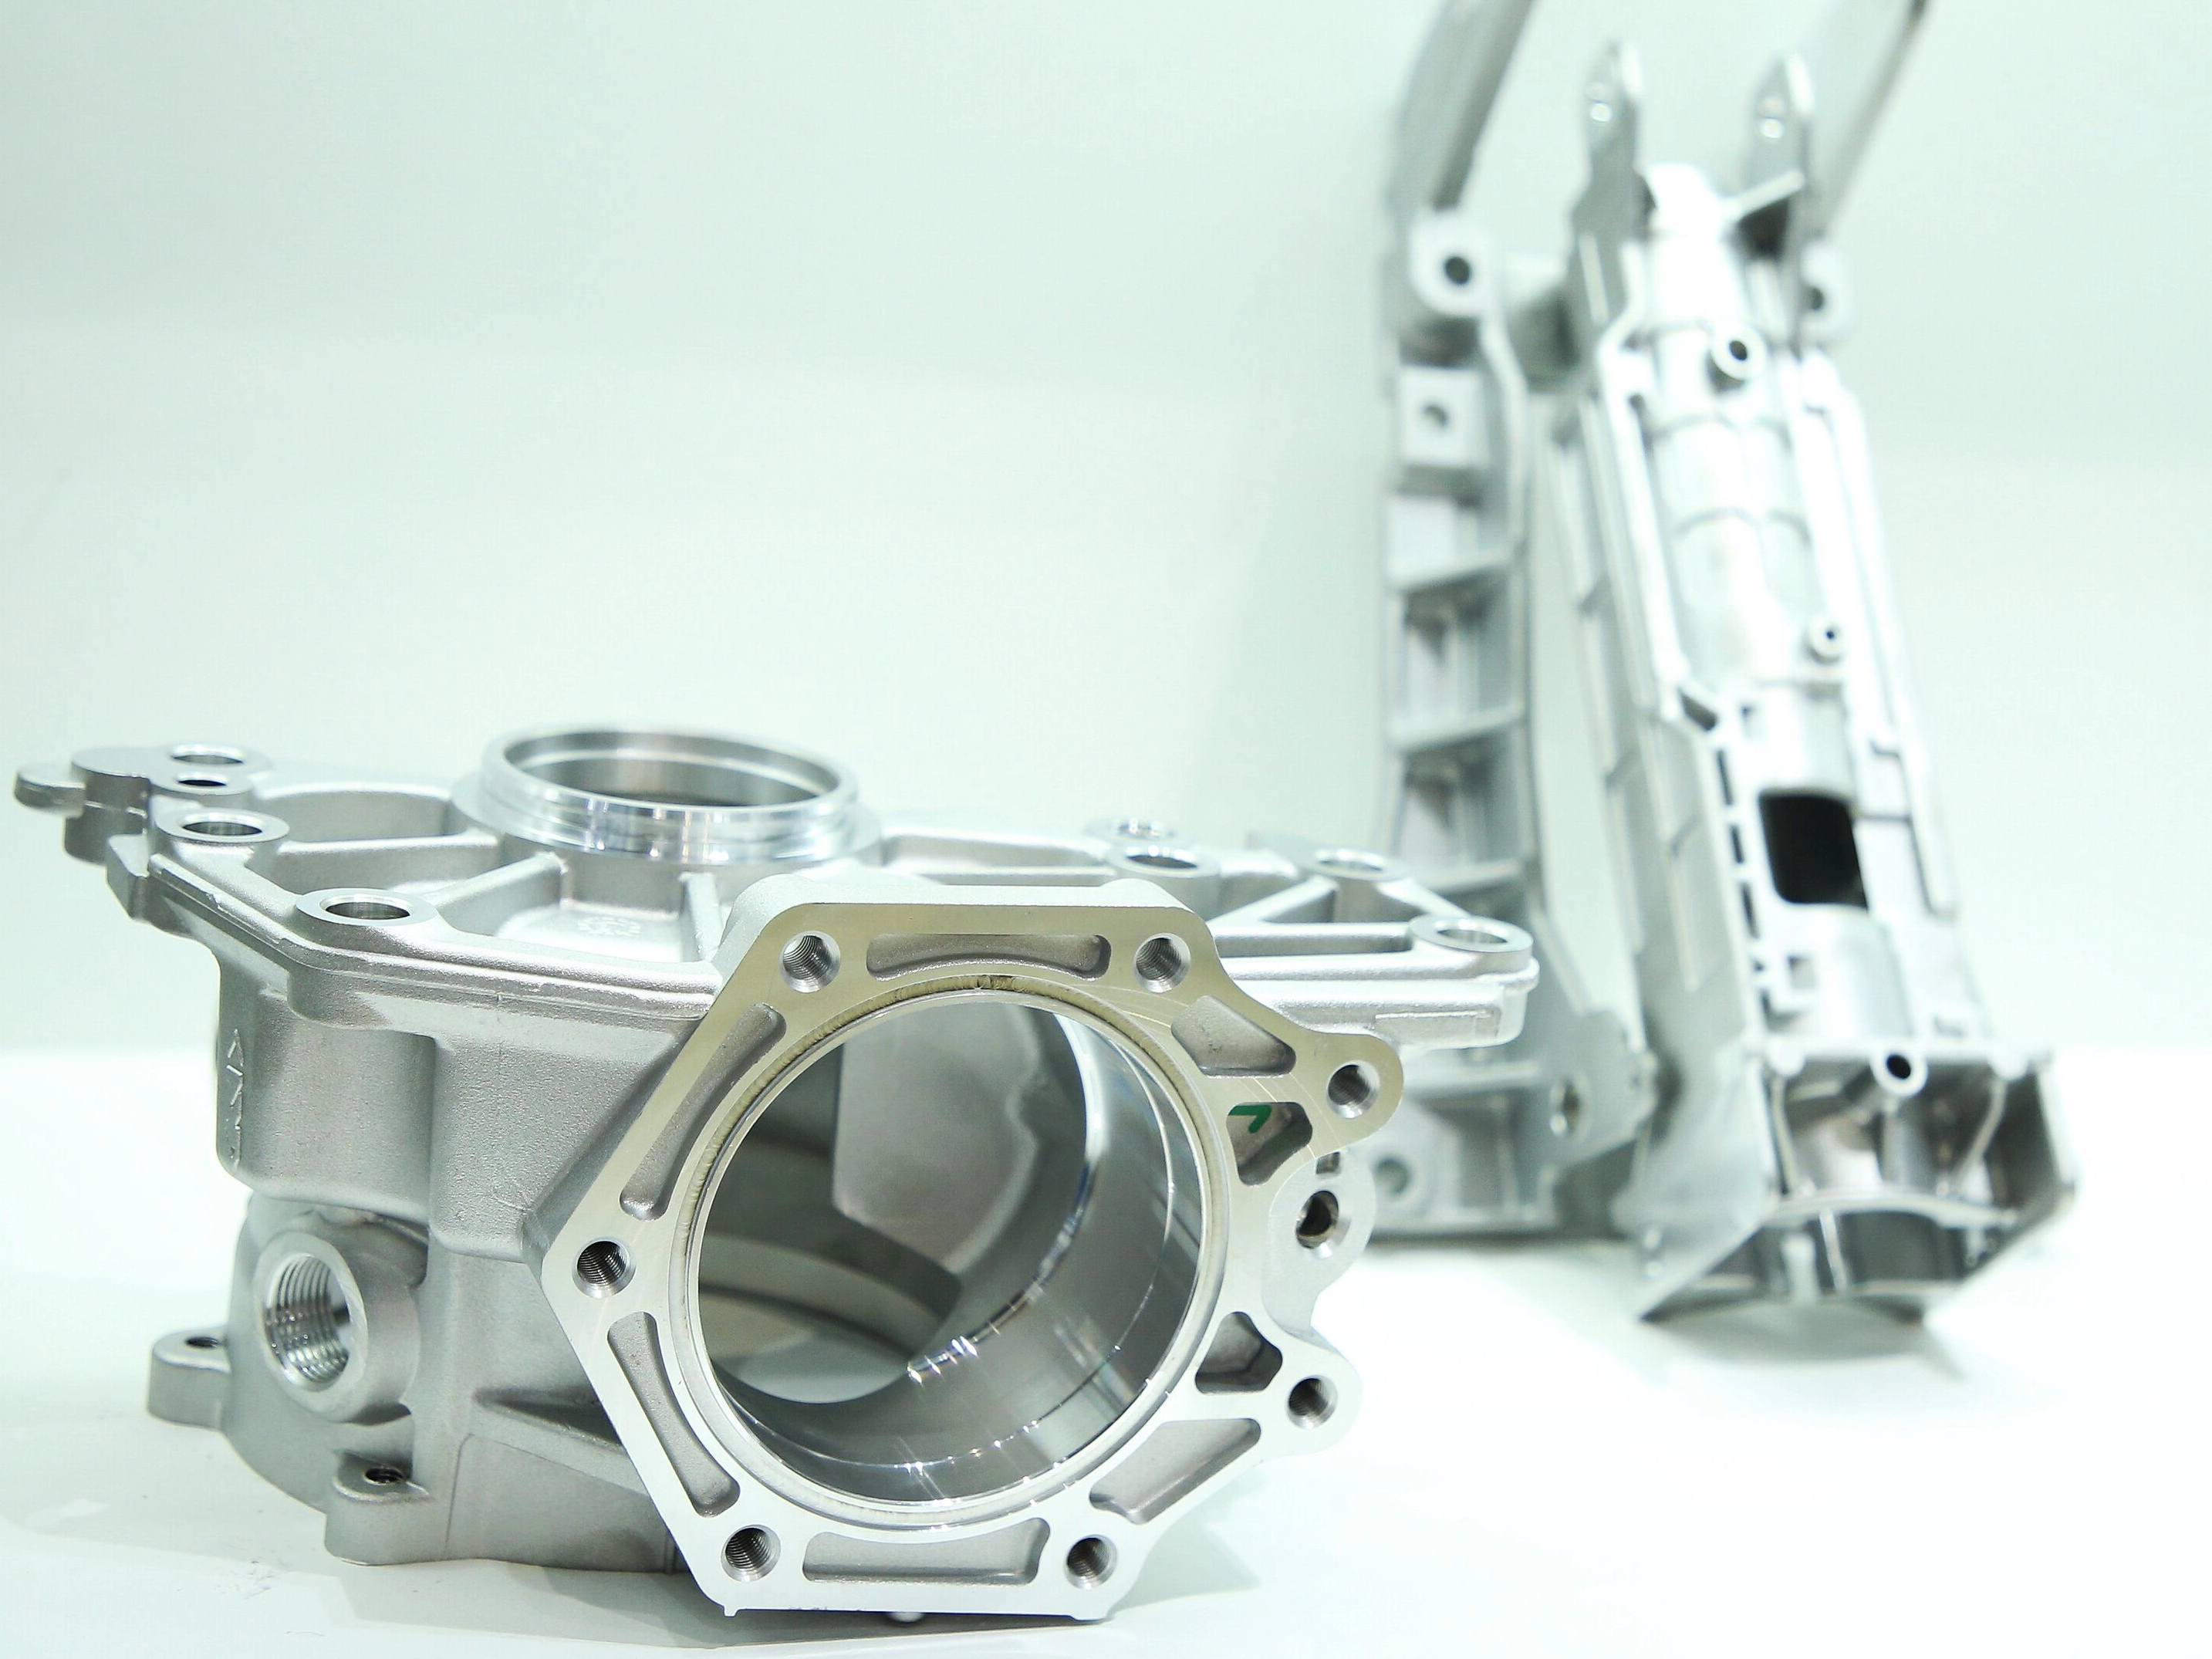 Zinc Alloy Die Casting Vs Aluminum Alloy Die Casting: What Are The Differences?